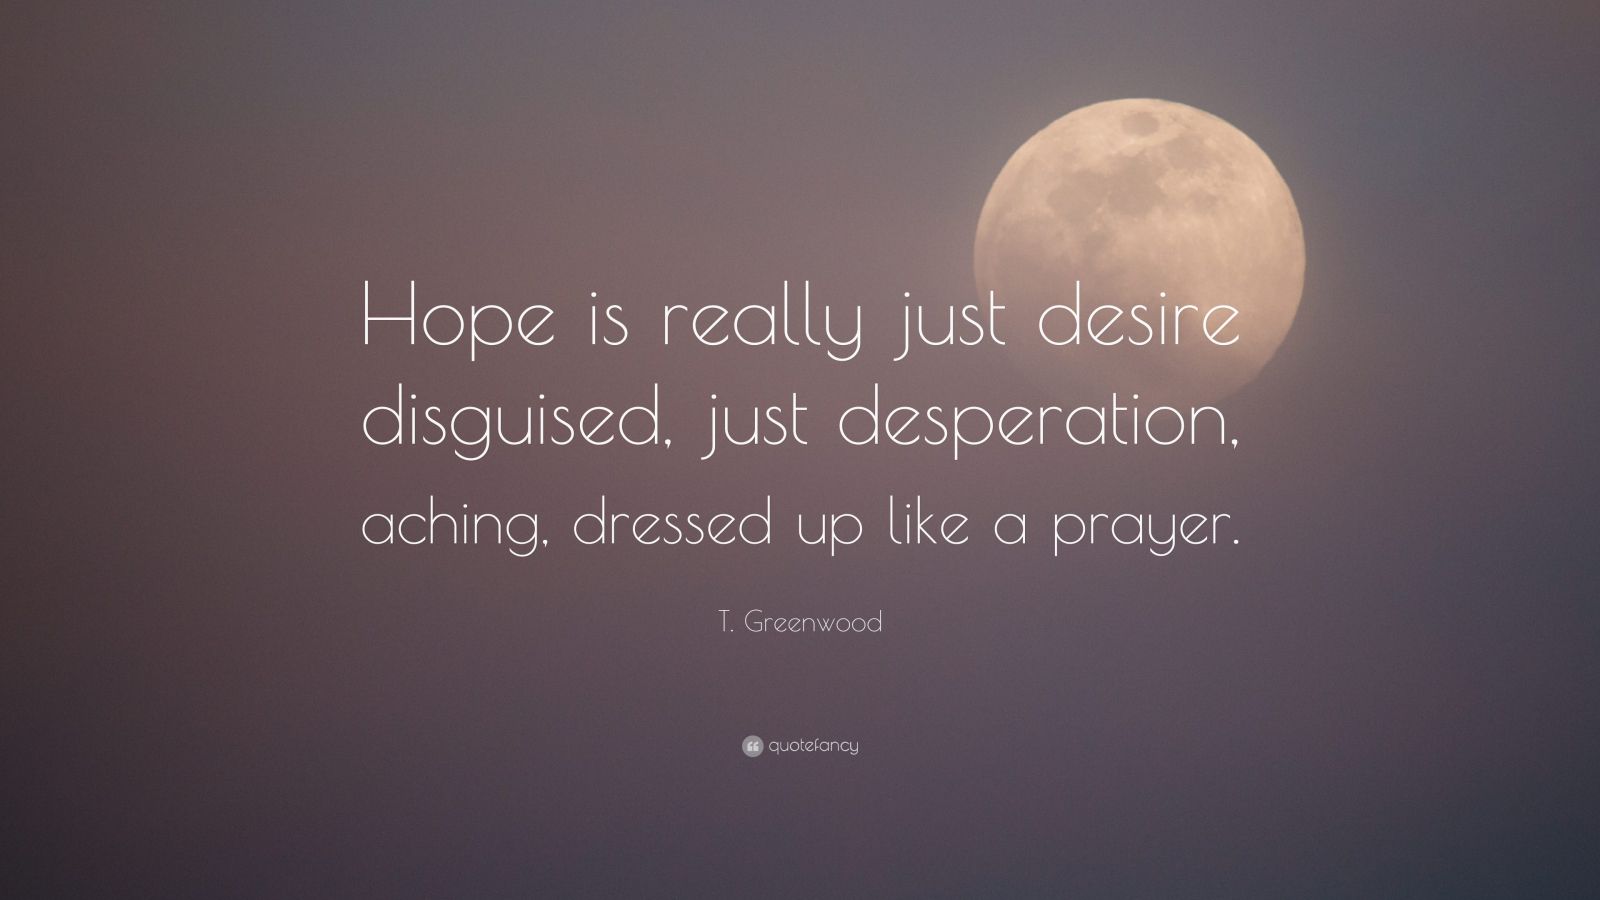 T. Greenwood Quote: “Hope is really just desire disguised, just